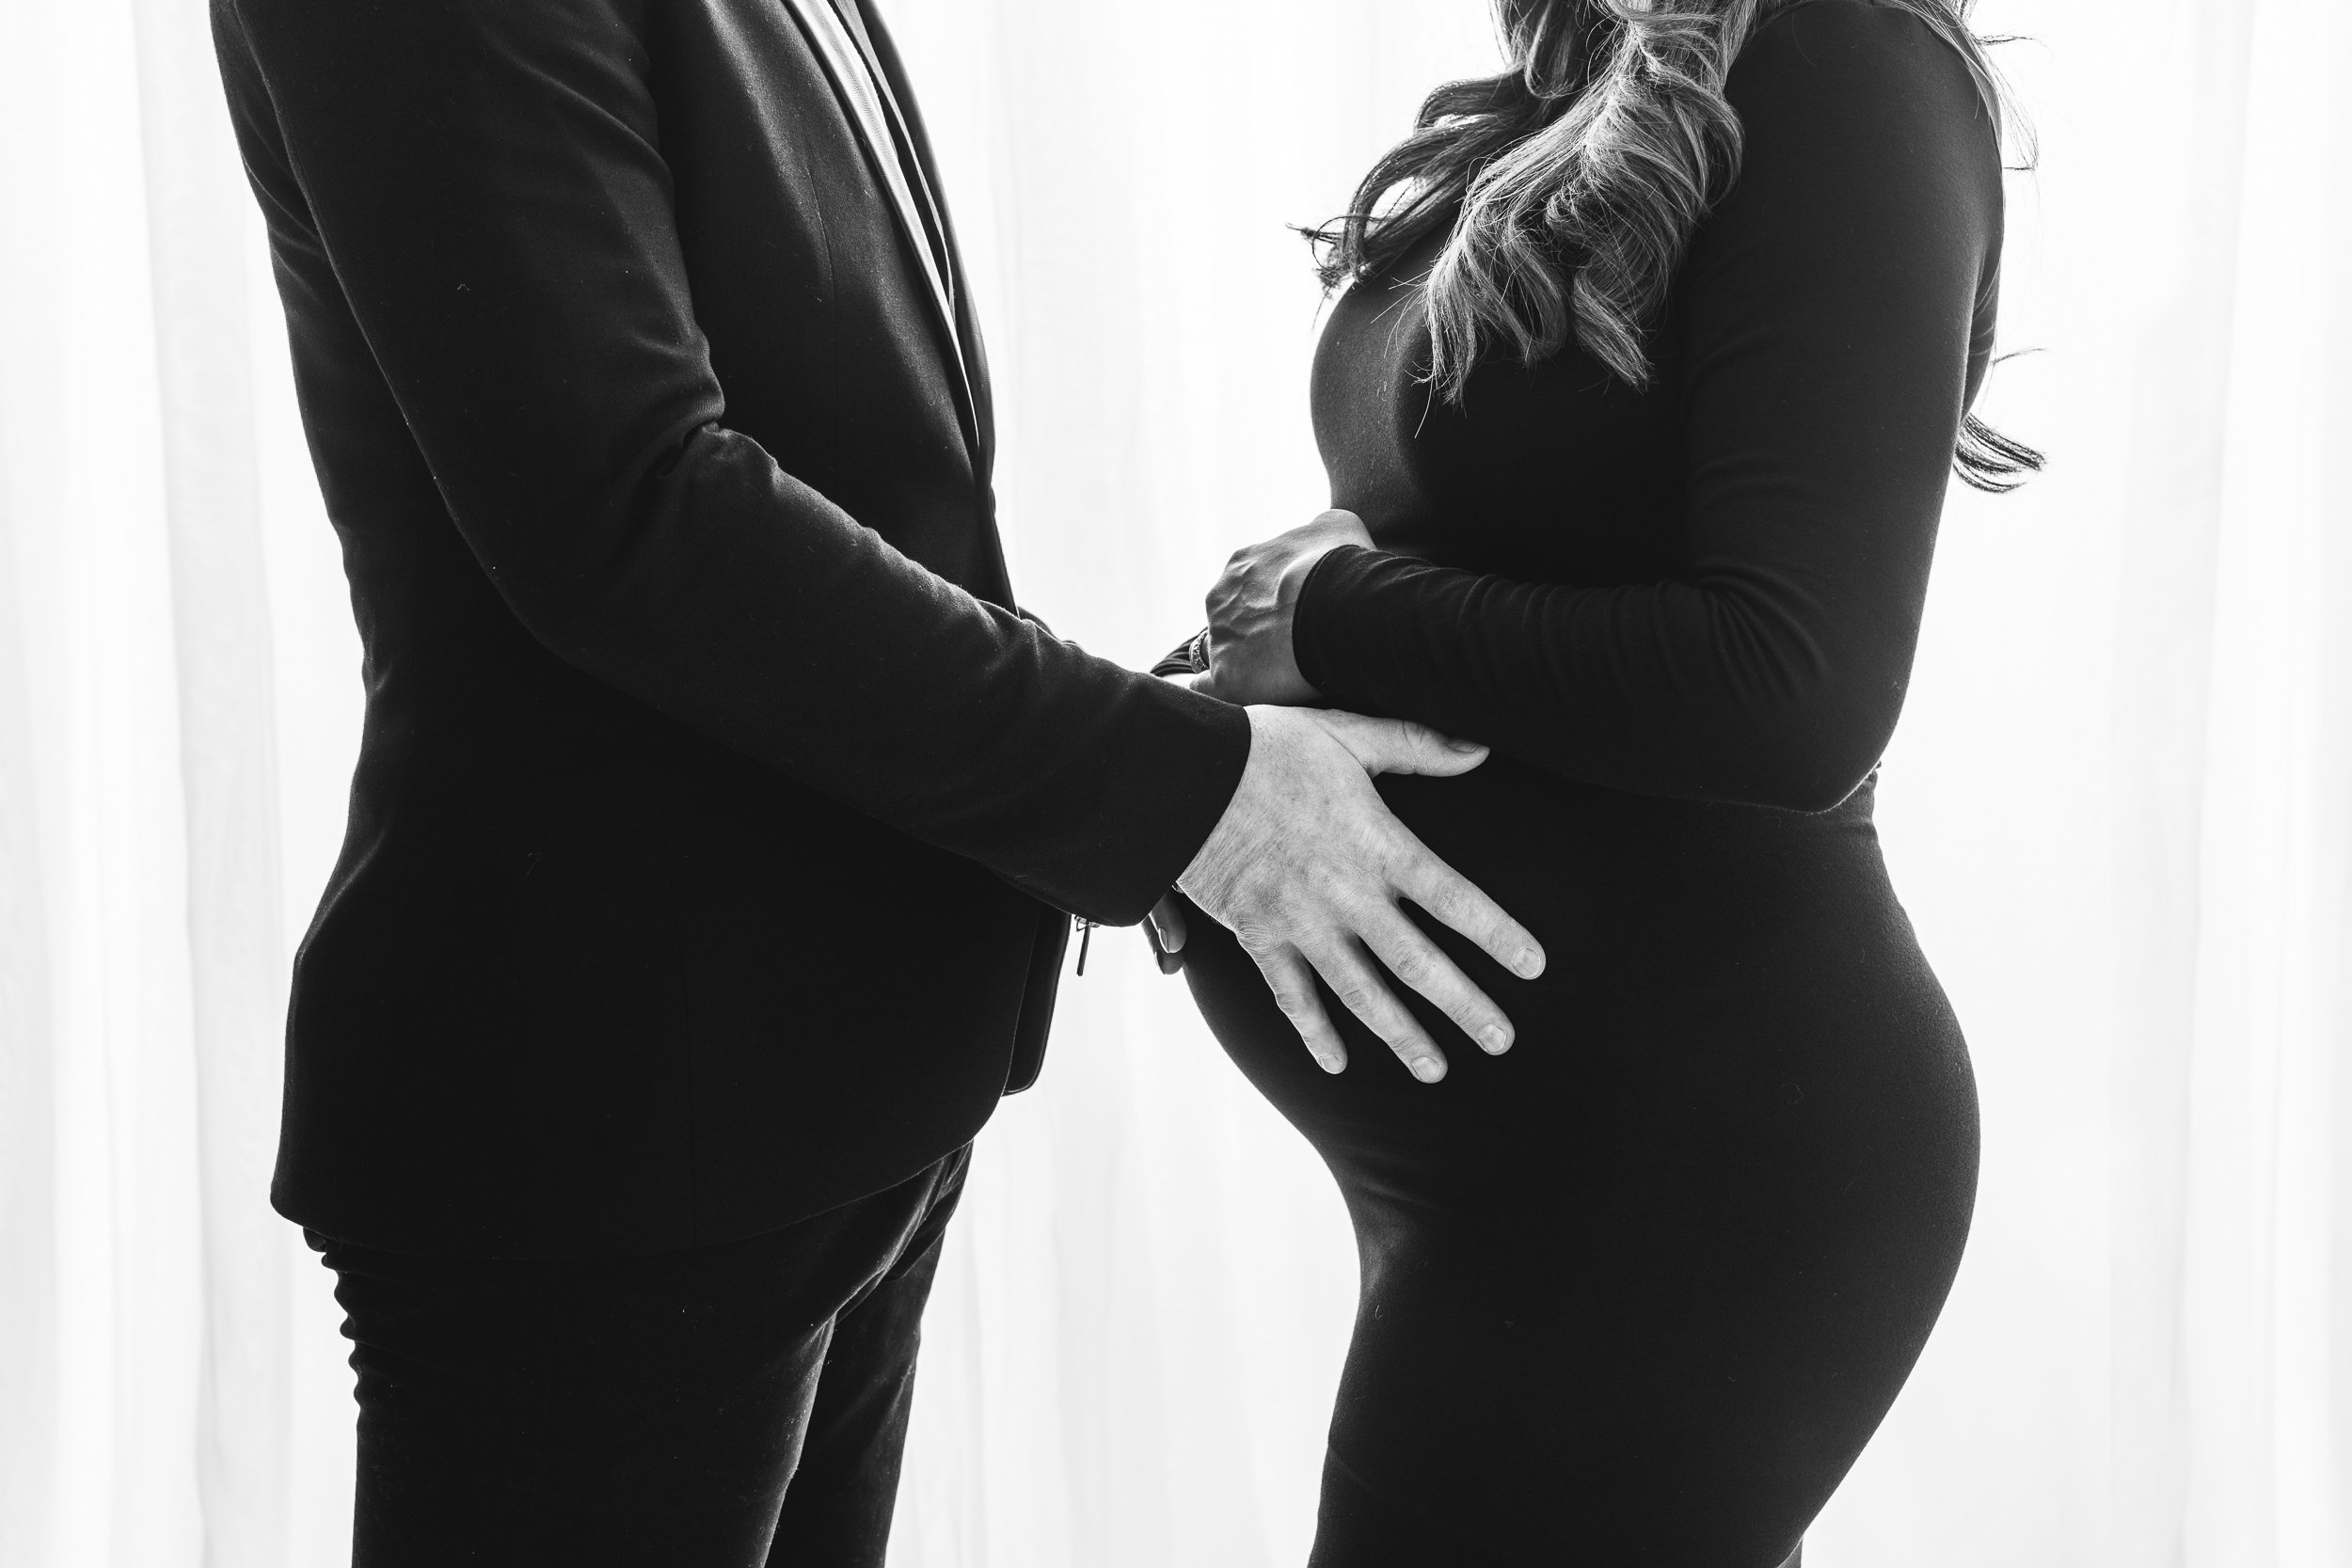  Nicole Hawkins Photography captures a husband and wife with their hands on her belly bump. Belly bump husband and wife bright NJ studio #NicoleHawkinsPhotography #maternitysession #NJmaternityphotographer #NewJerseyphotographers #maternityphotos 